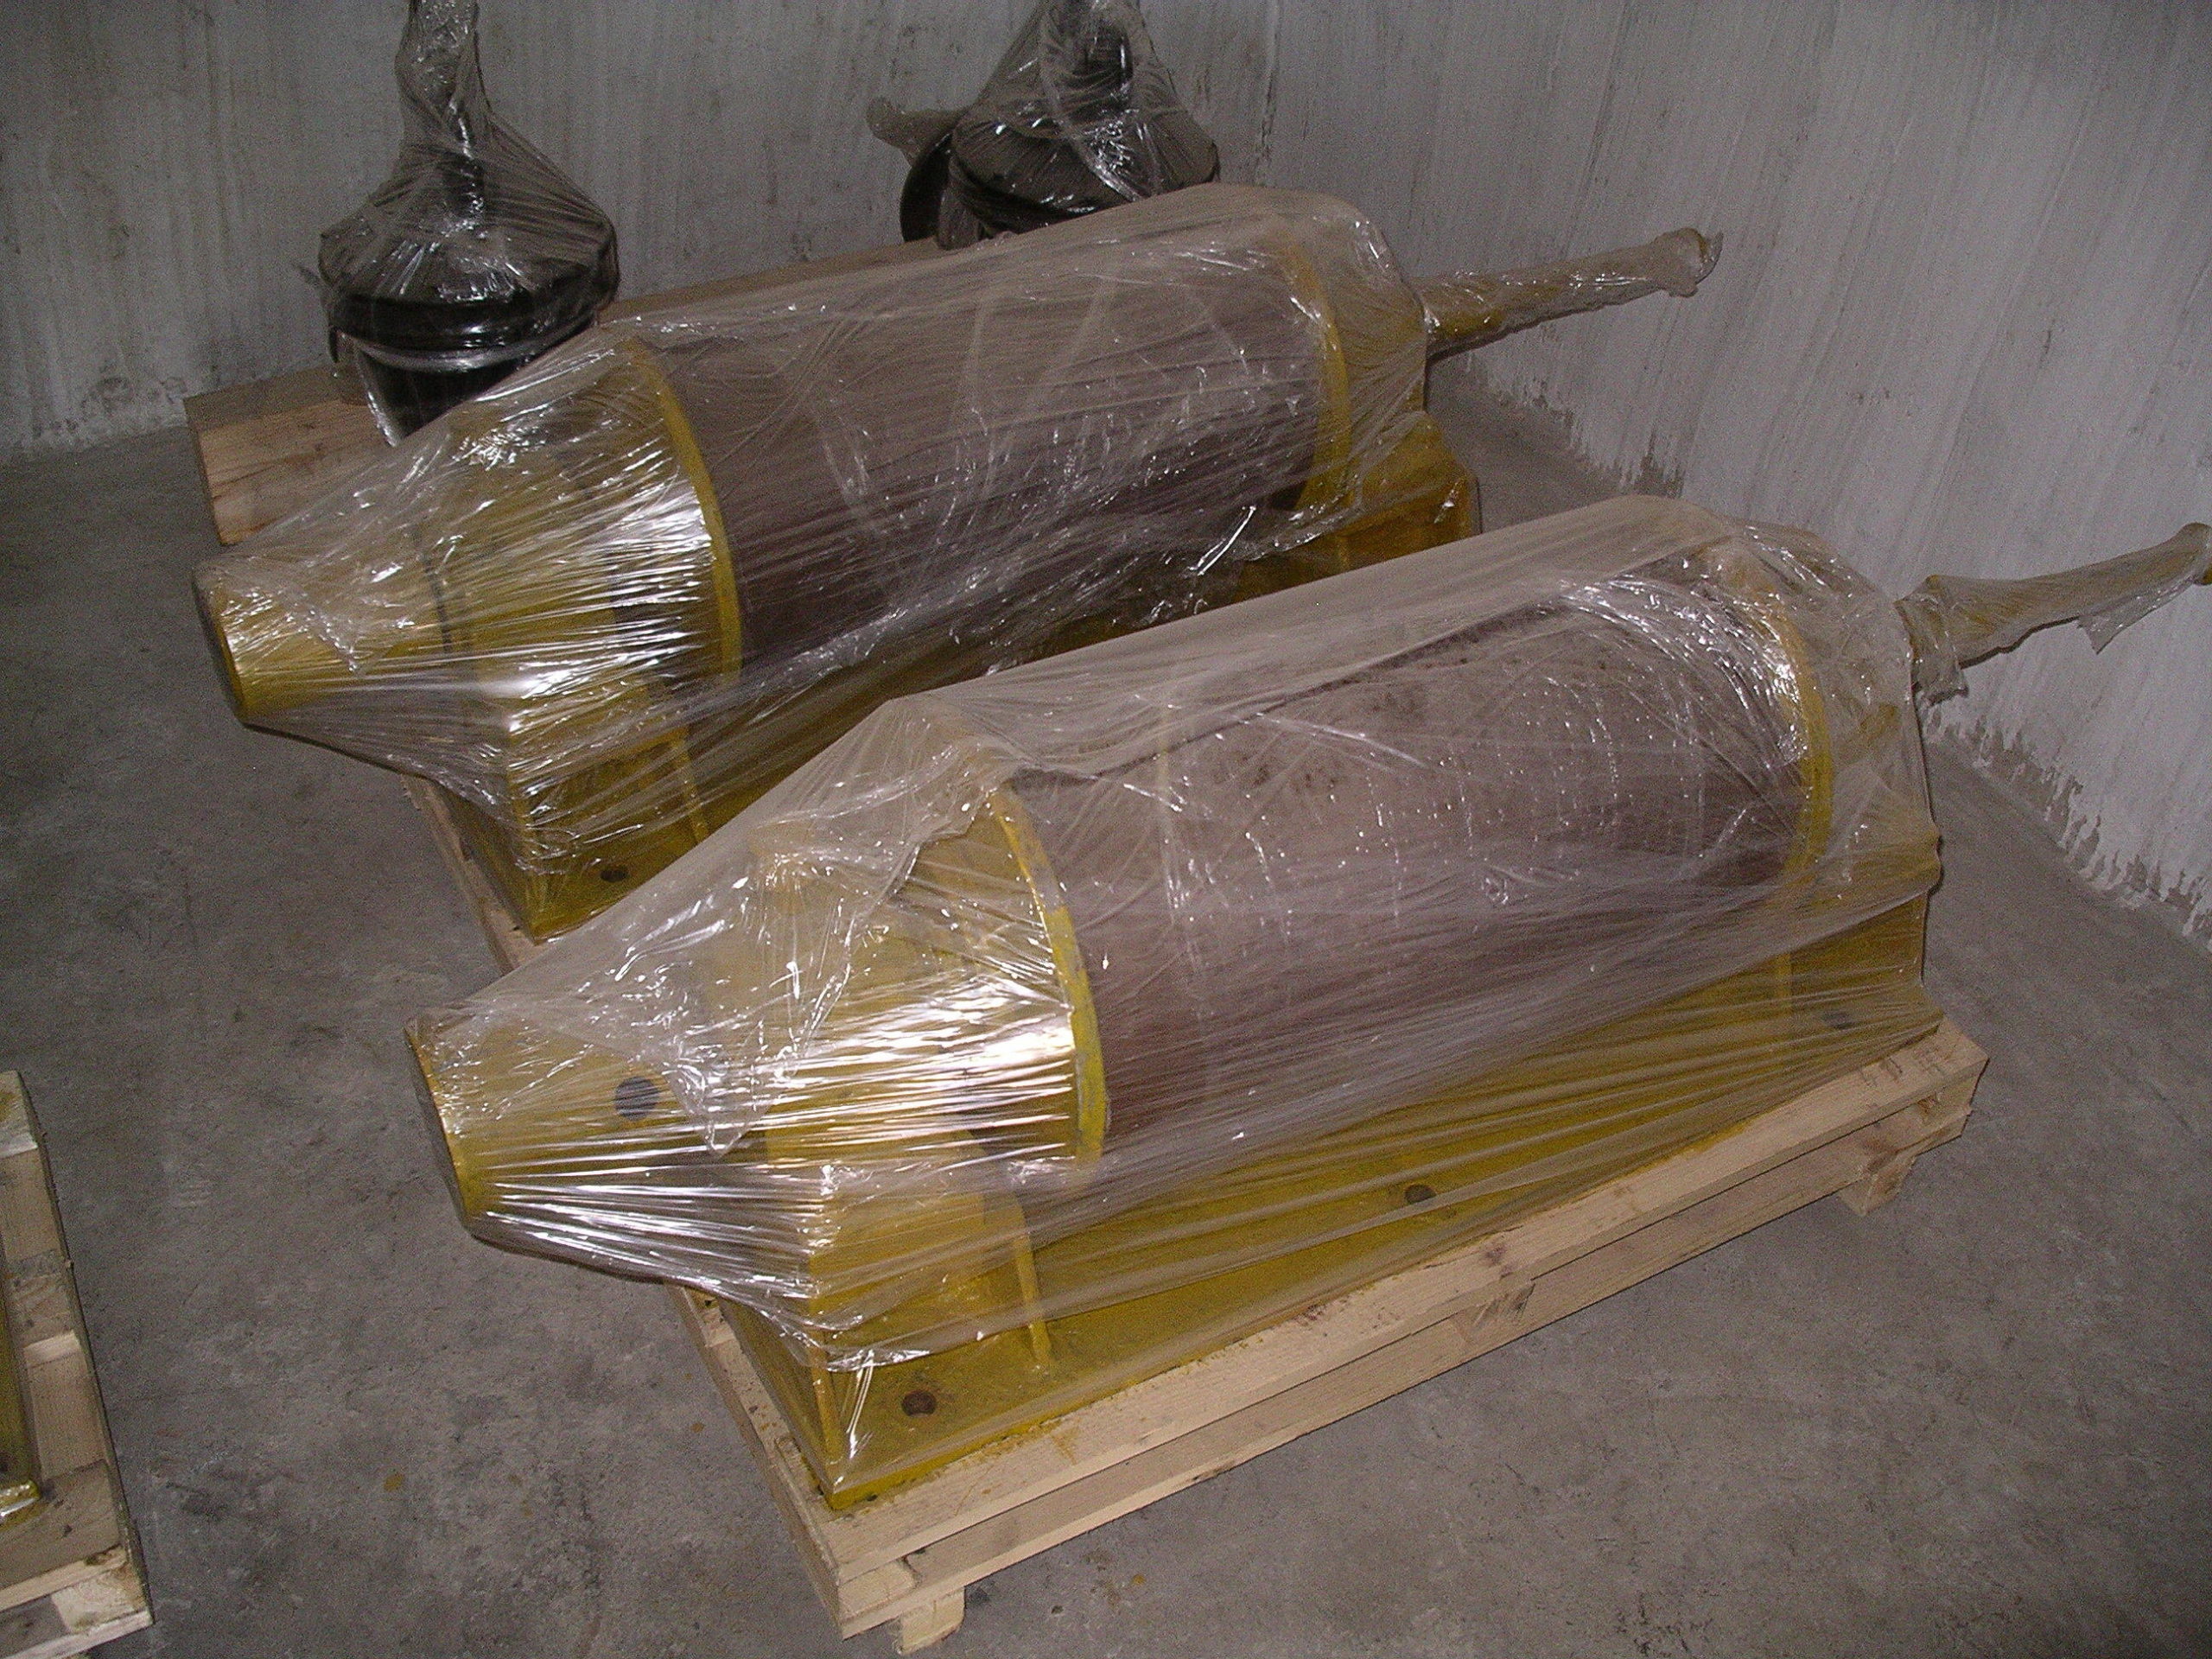 Motors painted mustard color wrapped in transparent plastic stored on wooden pallets